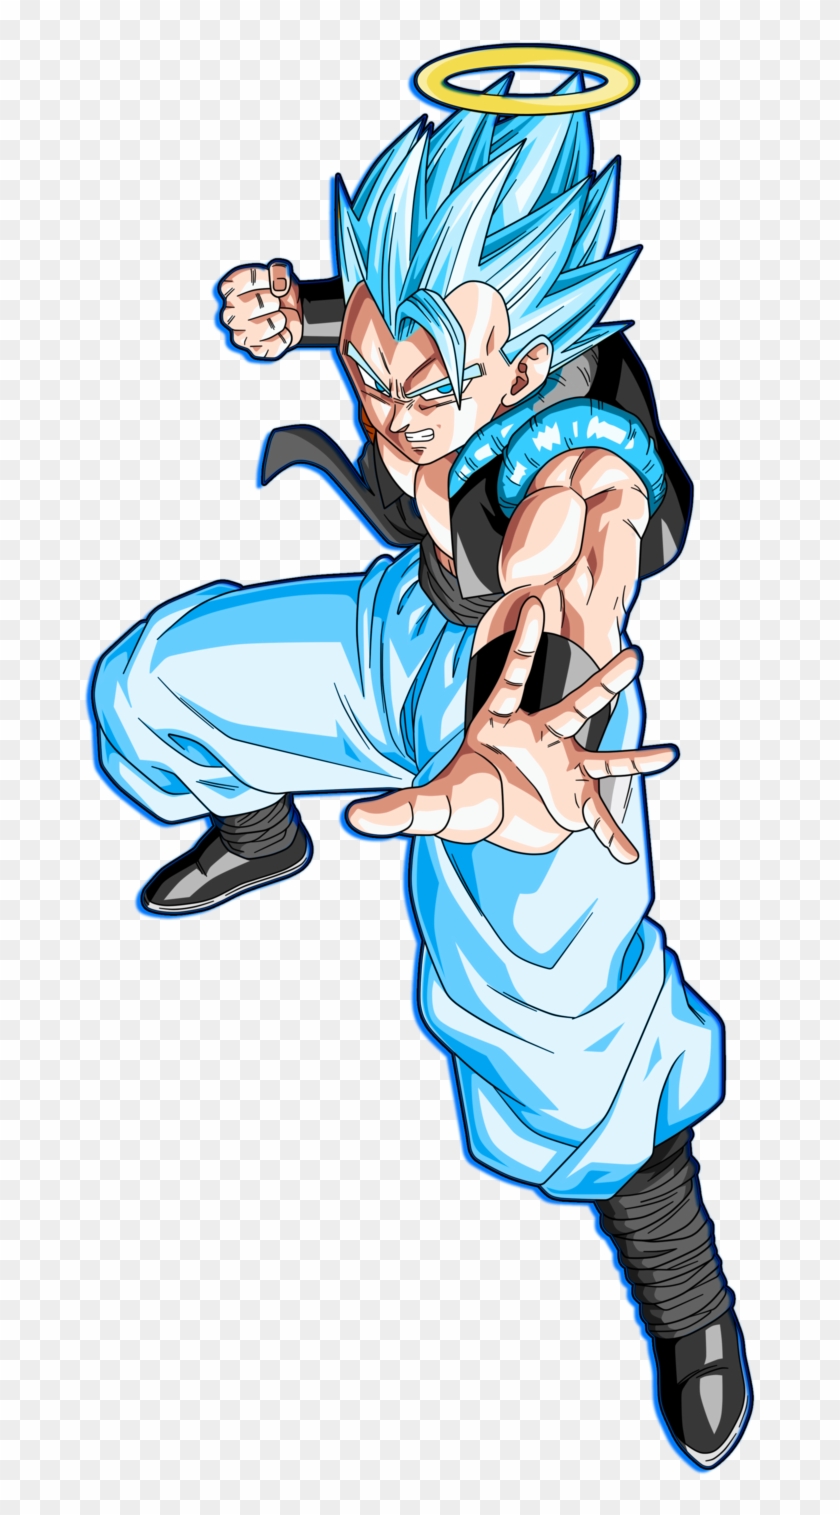 Ssgss Gogeta Blue Glow Blue Black Alternate By Squad8star D93xdx9 Naruto And Goku And Luffy Fusion Clipart 2495350 Pikpng